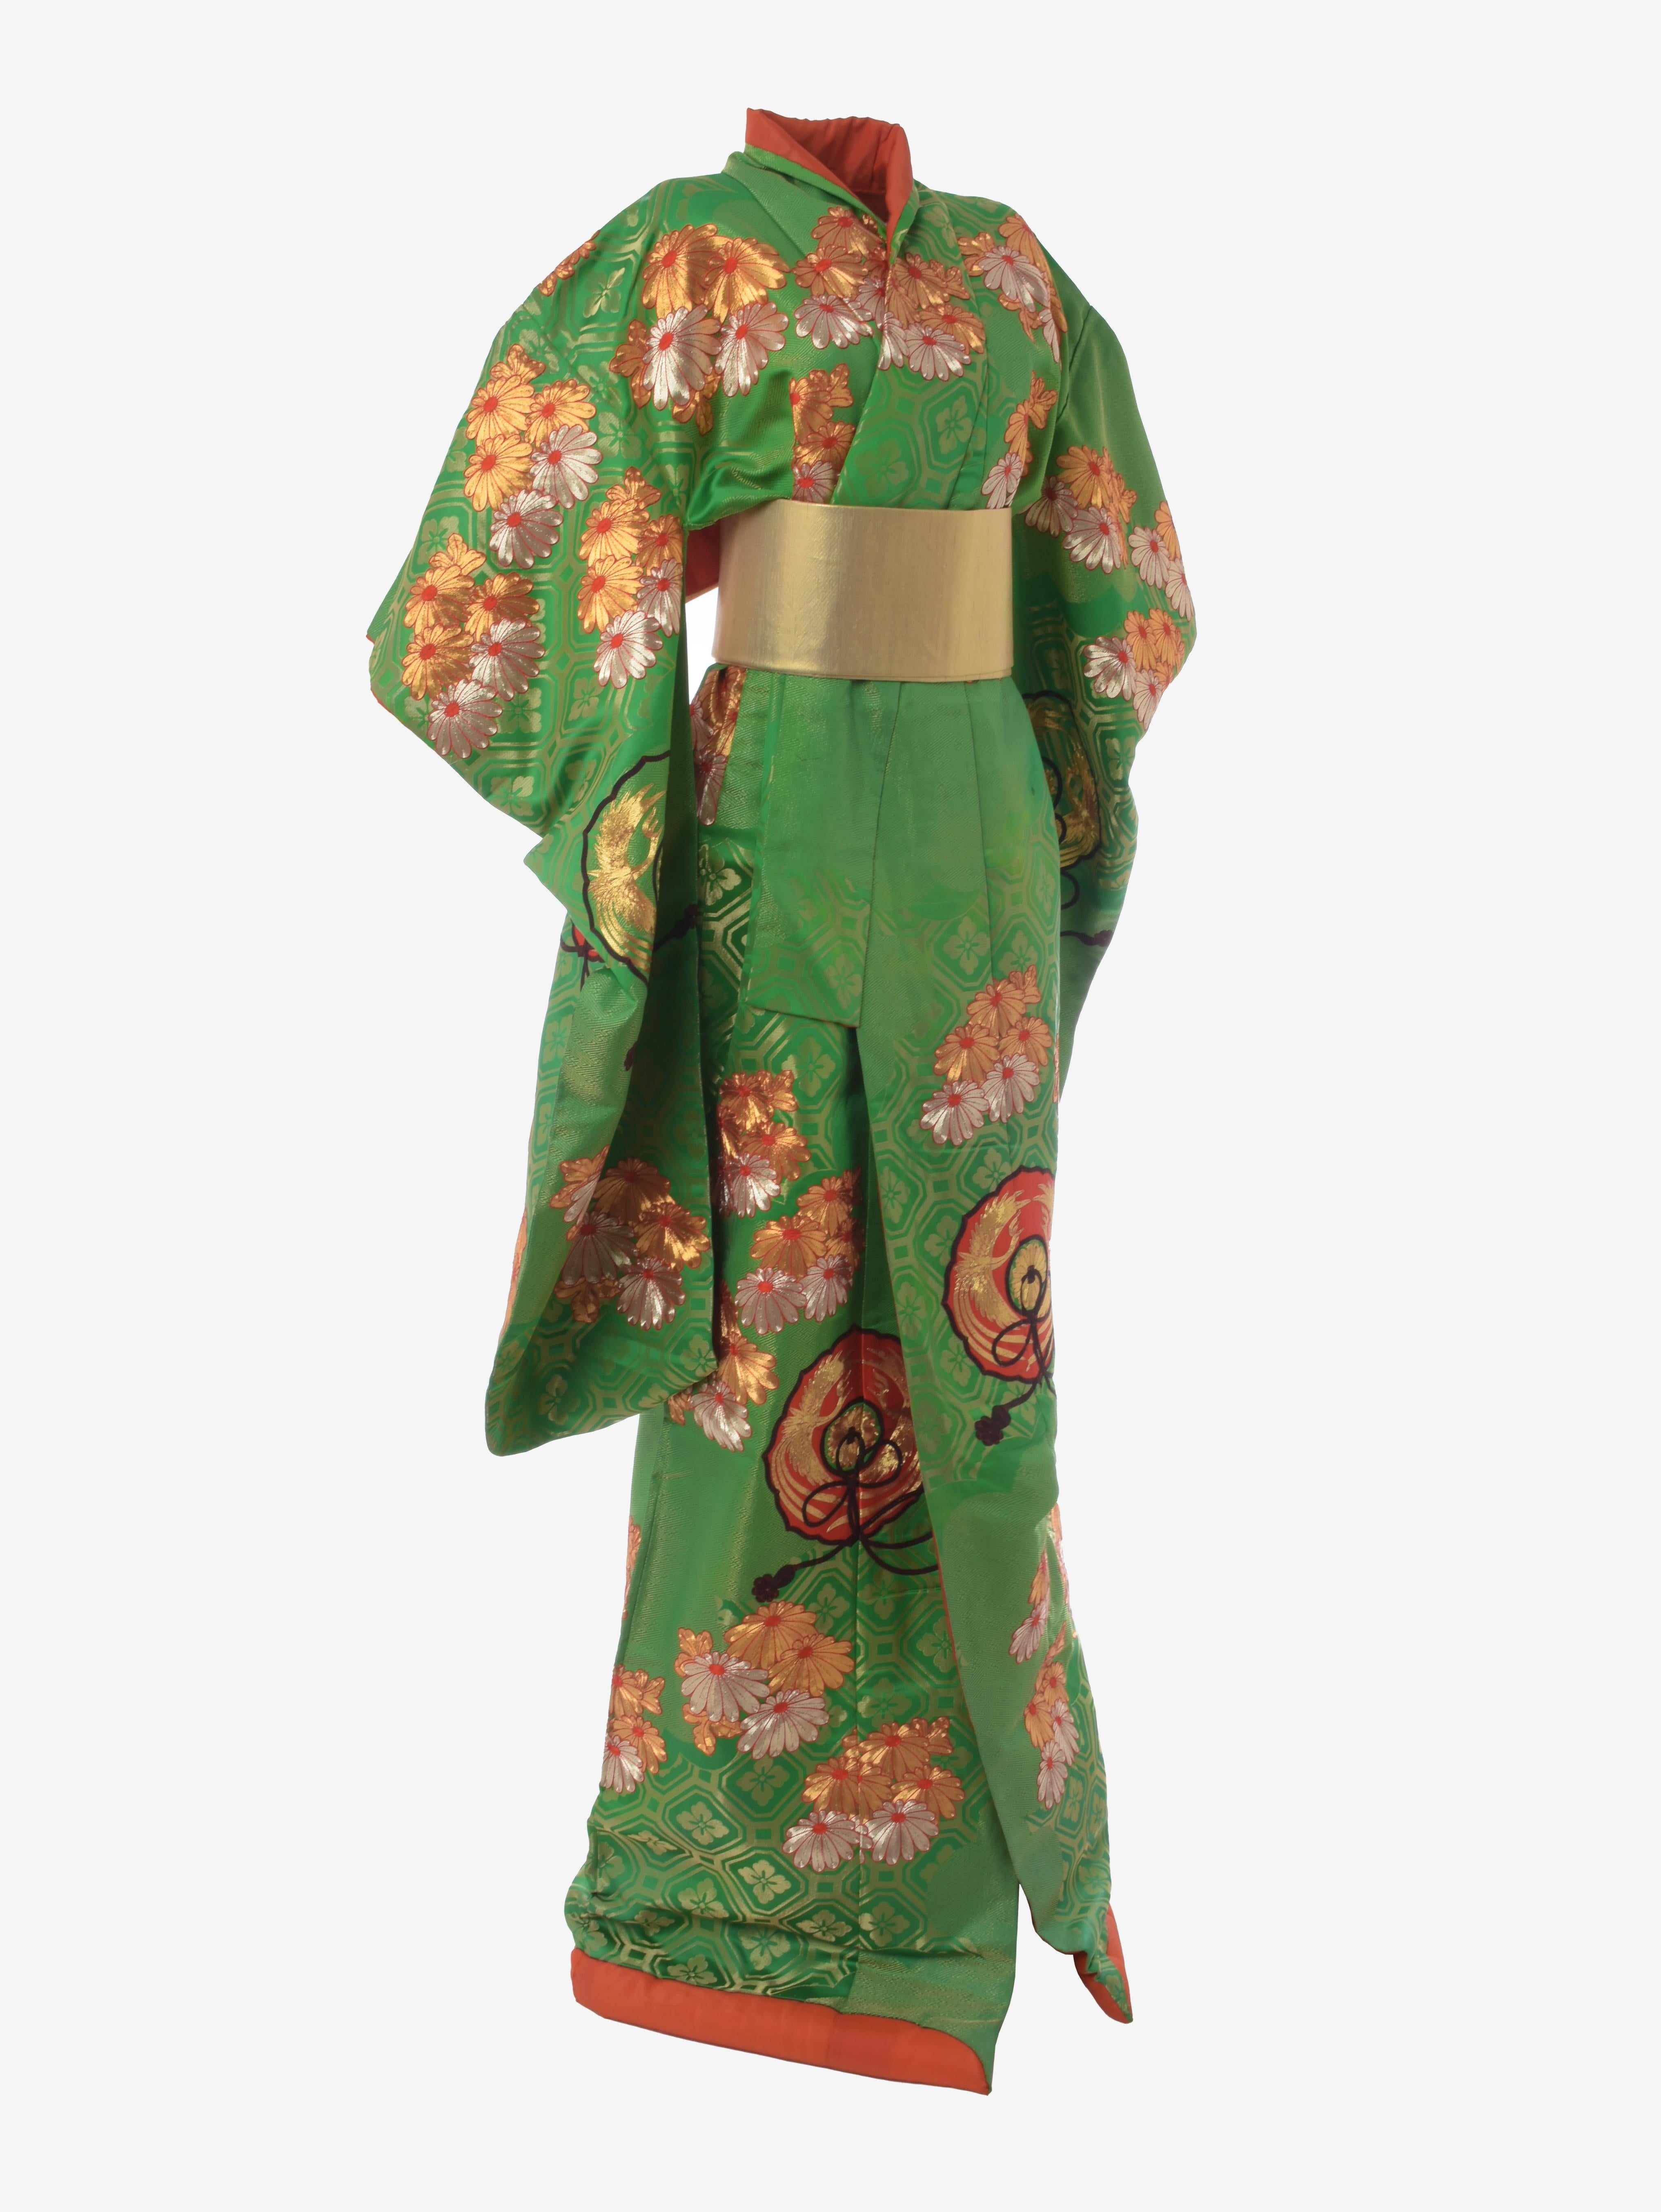 Green Kimono Uchikake is a gorgeous and majestic Japanese uchikake silk wedding kimono fully embroidered with chrysanthemum flowers and fans.

CONDITION
Very good vintage condition

COMPOSITION
100%